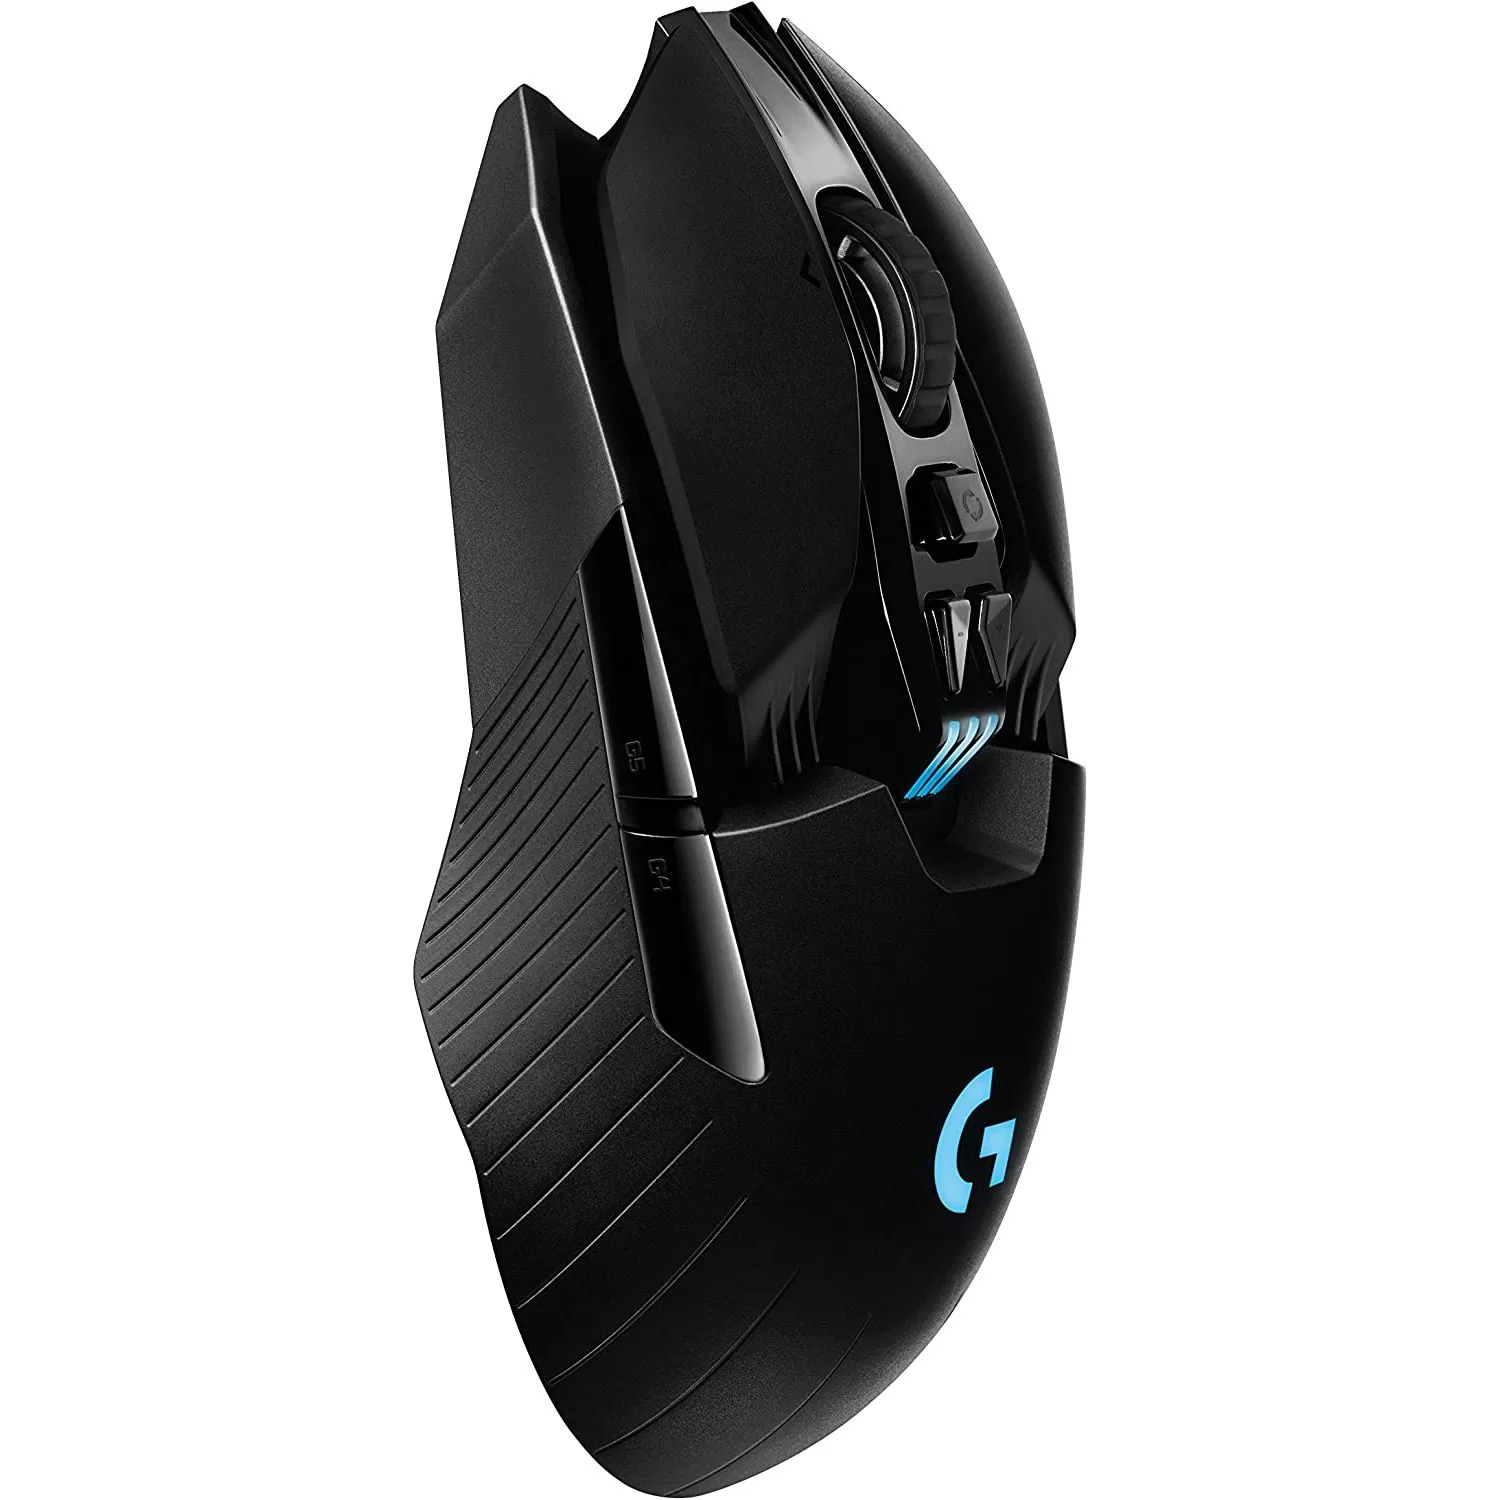 Logitech G903 LIGHTSPEED Wireless Gaming Mouse with HERO Sensor, OB Accessories 8